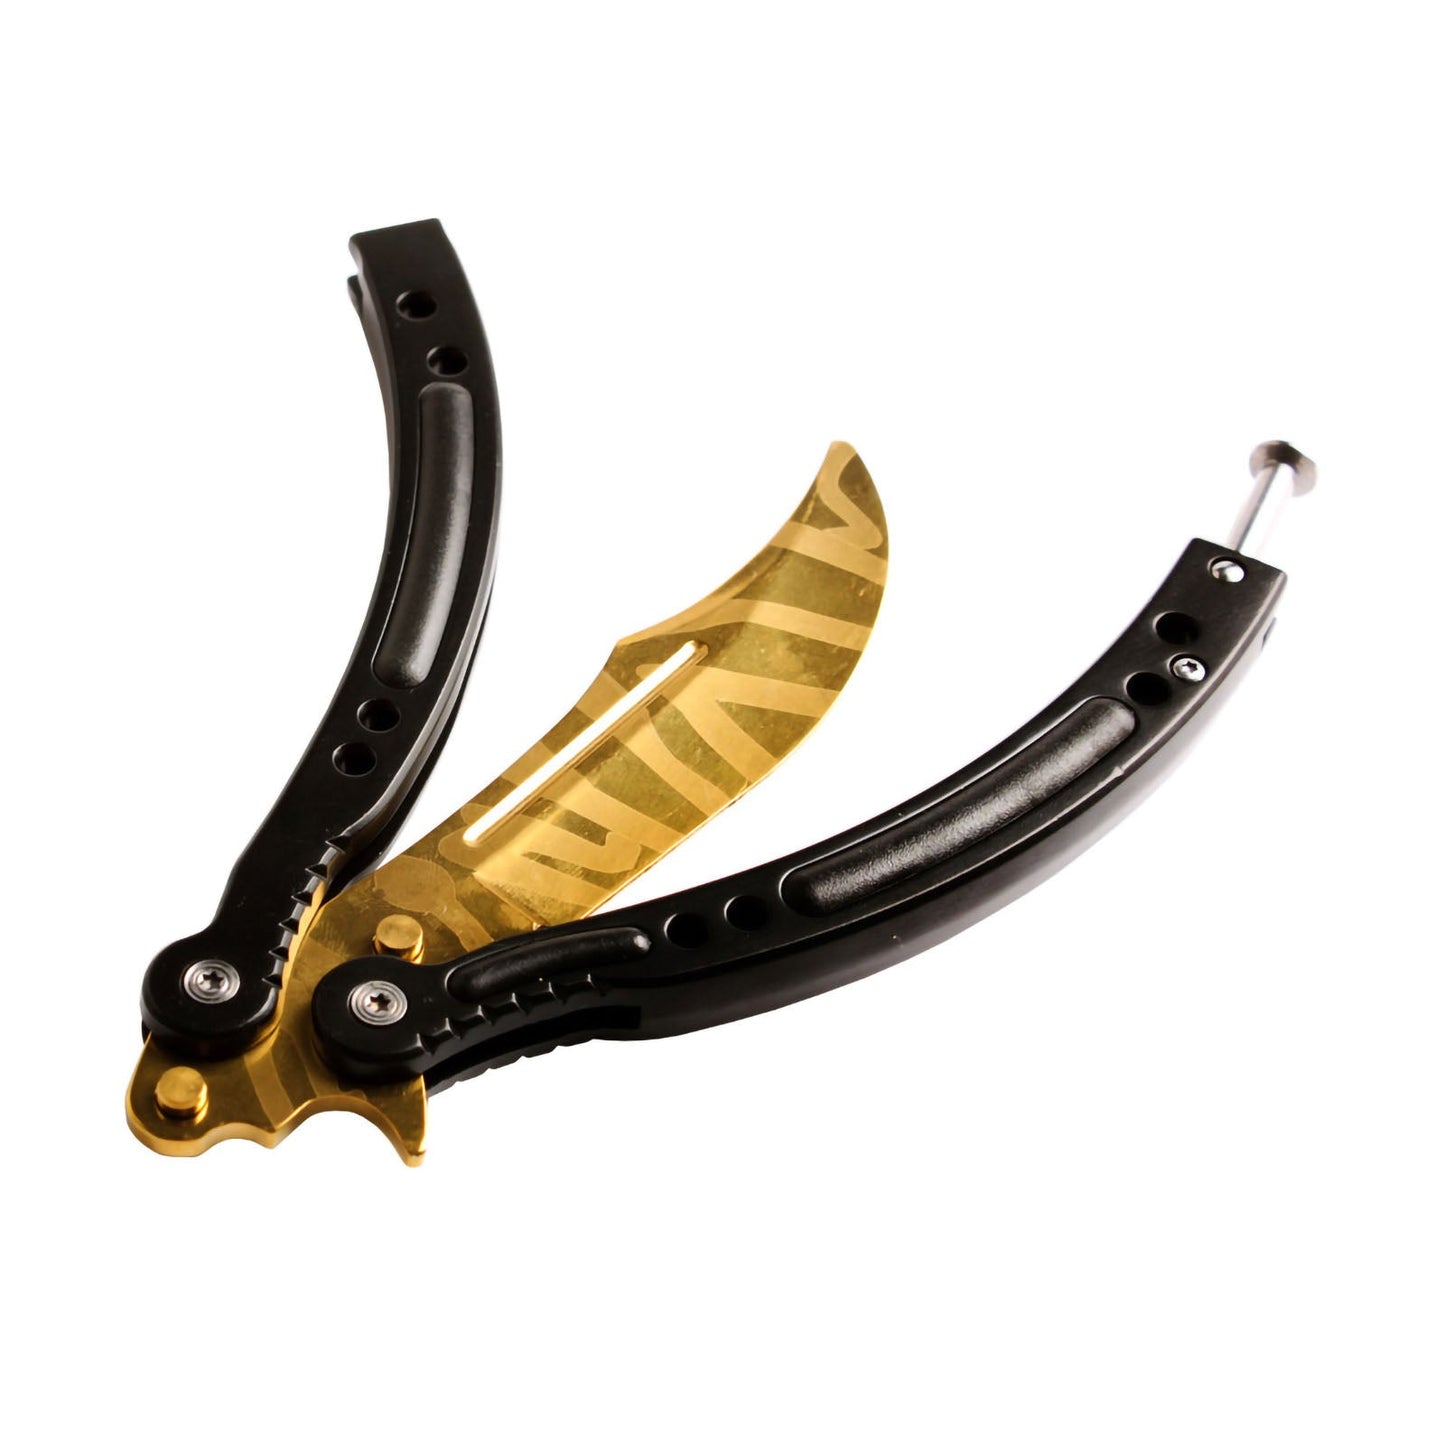 Andux Balisong Practice Trainer Curved Blade CS/HDD13 (Golden) (Not Available in the UK)